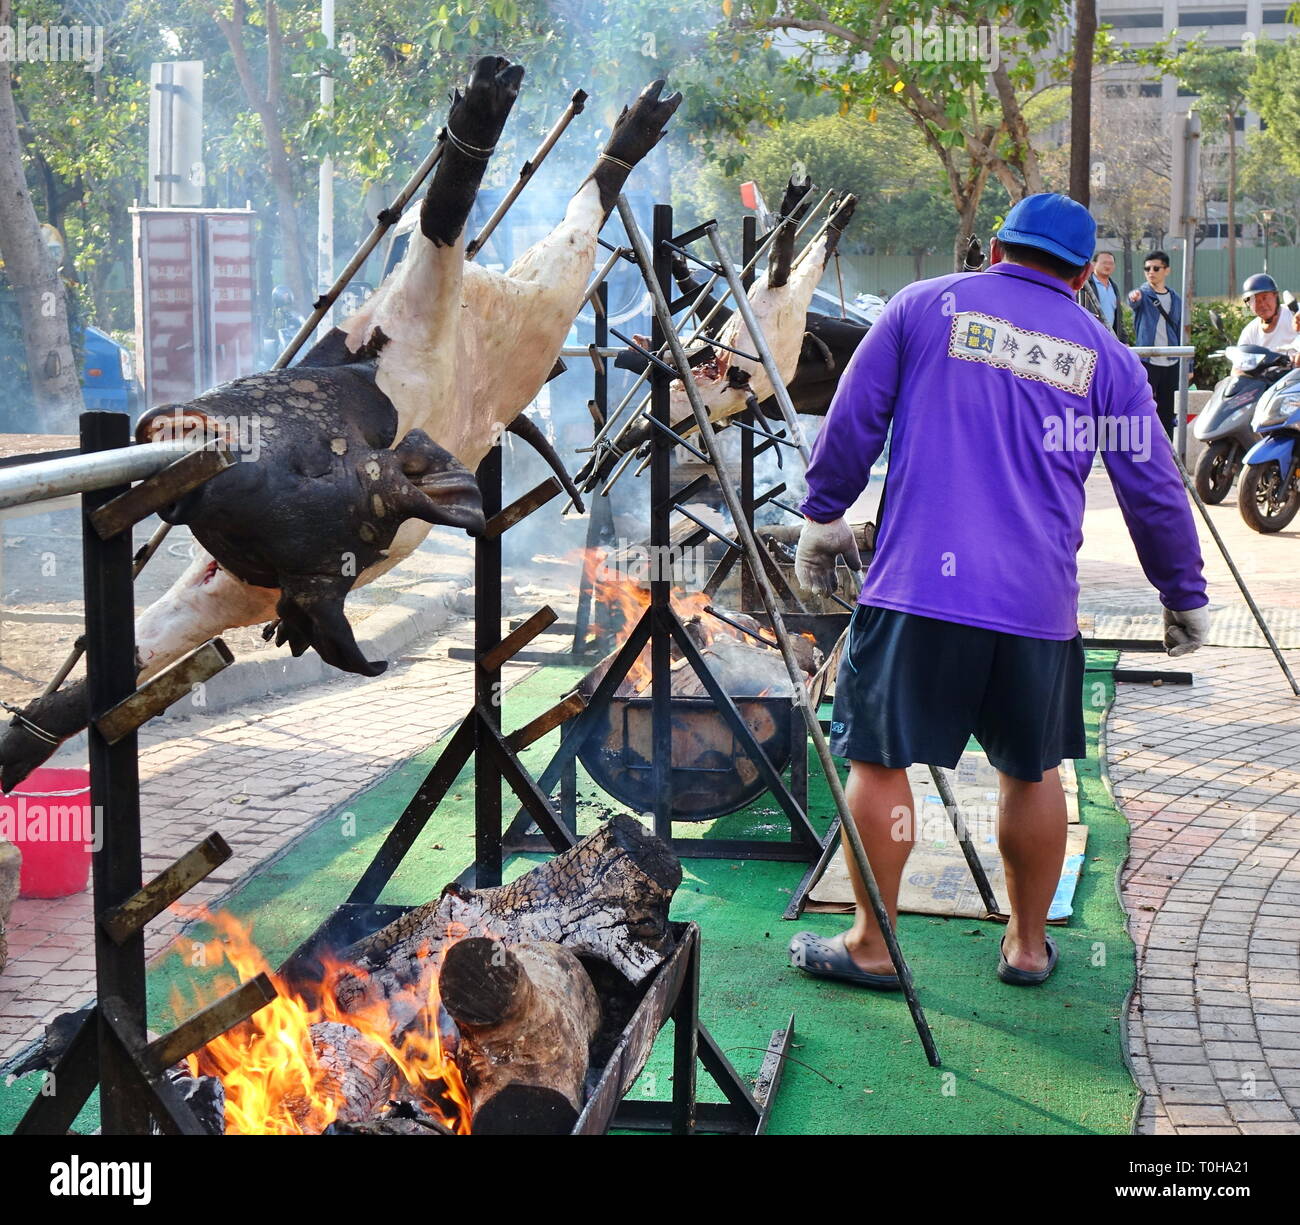 KAOHSIUNG, TAIWAN -- FEBRUARY 9, 2019: A member of Taiwan's indigenous people roasts whole pigs on the banks of the Love River during the Lantern Fest Stock Photo